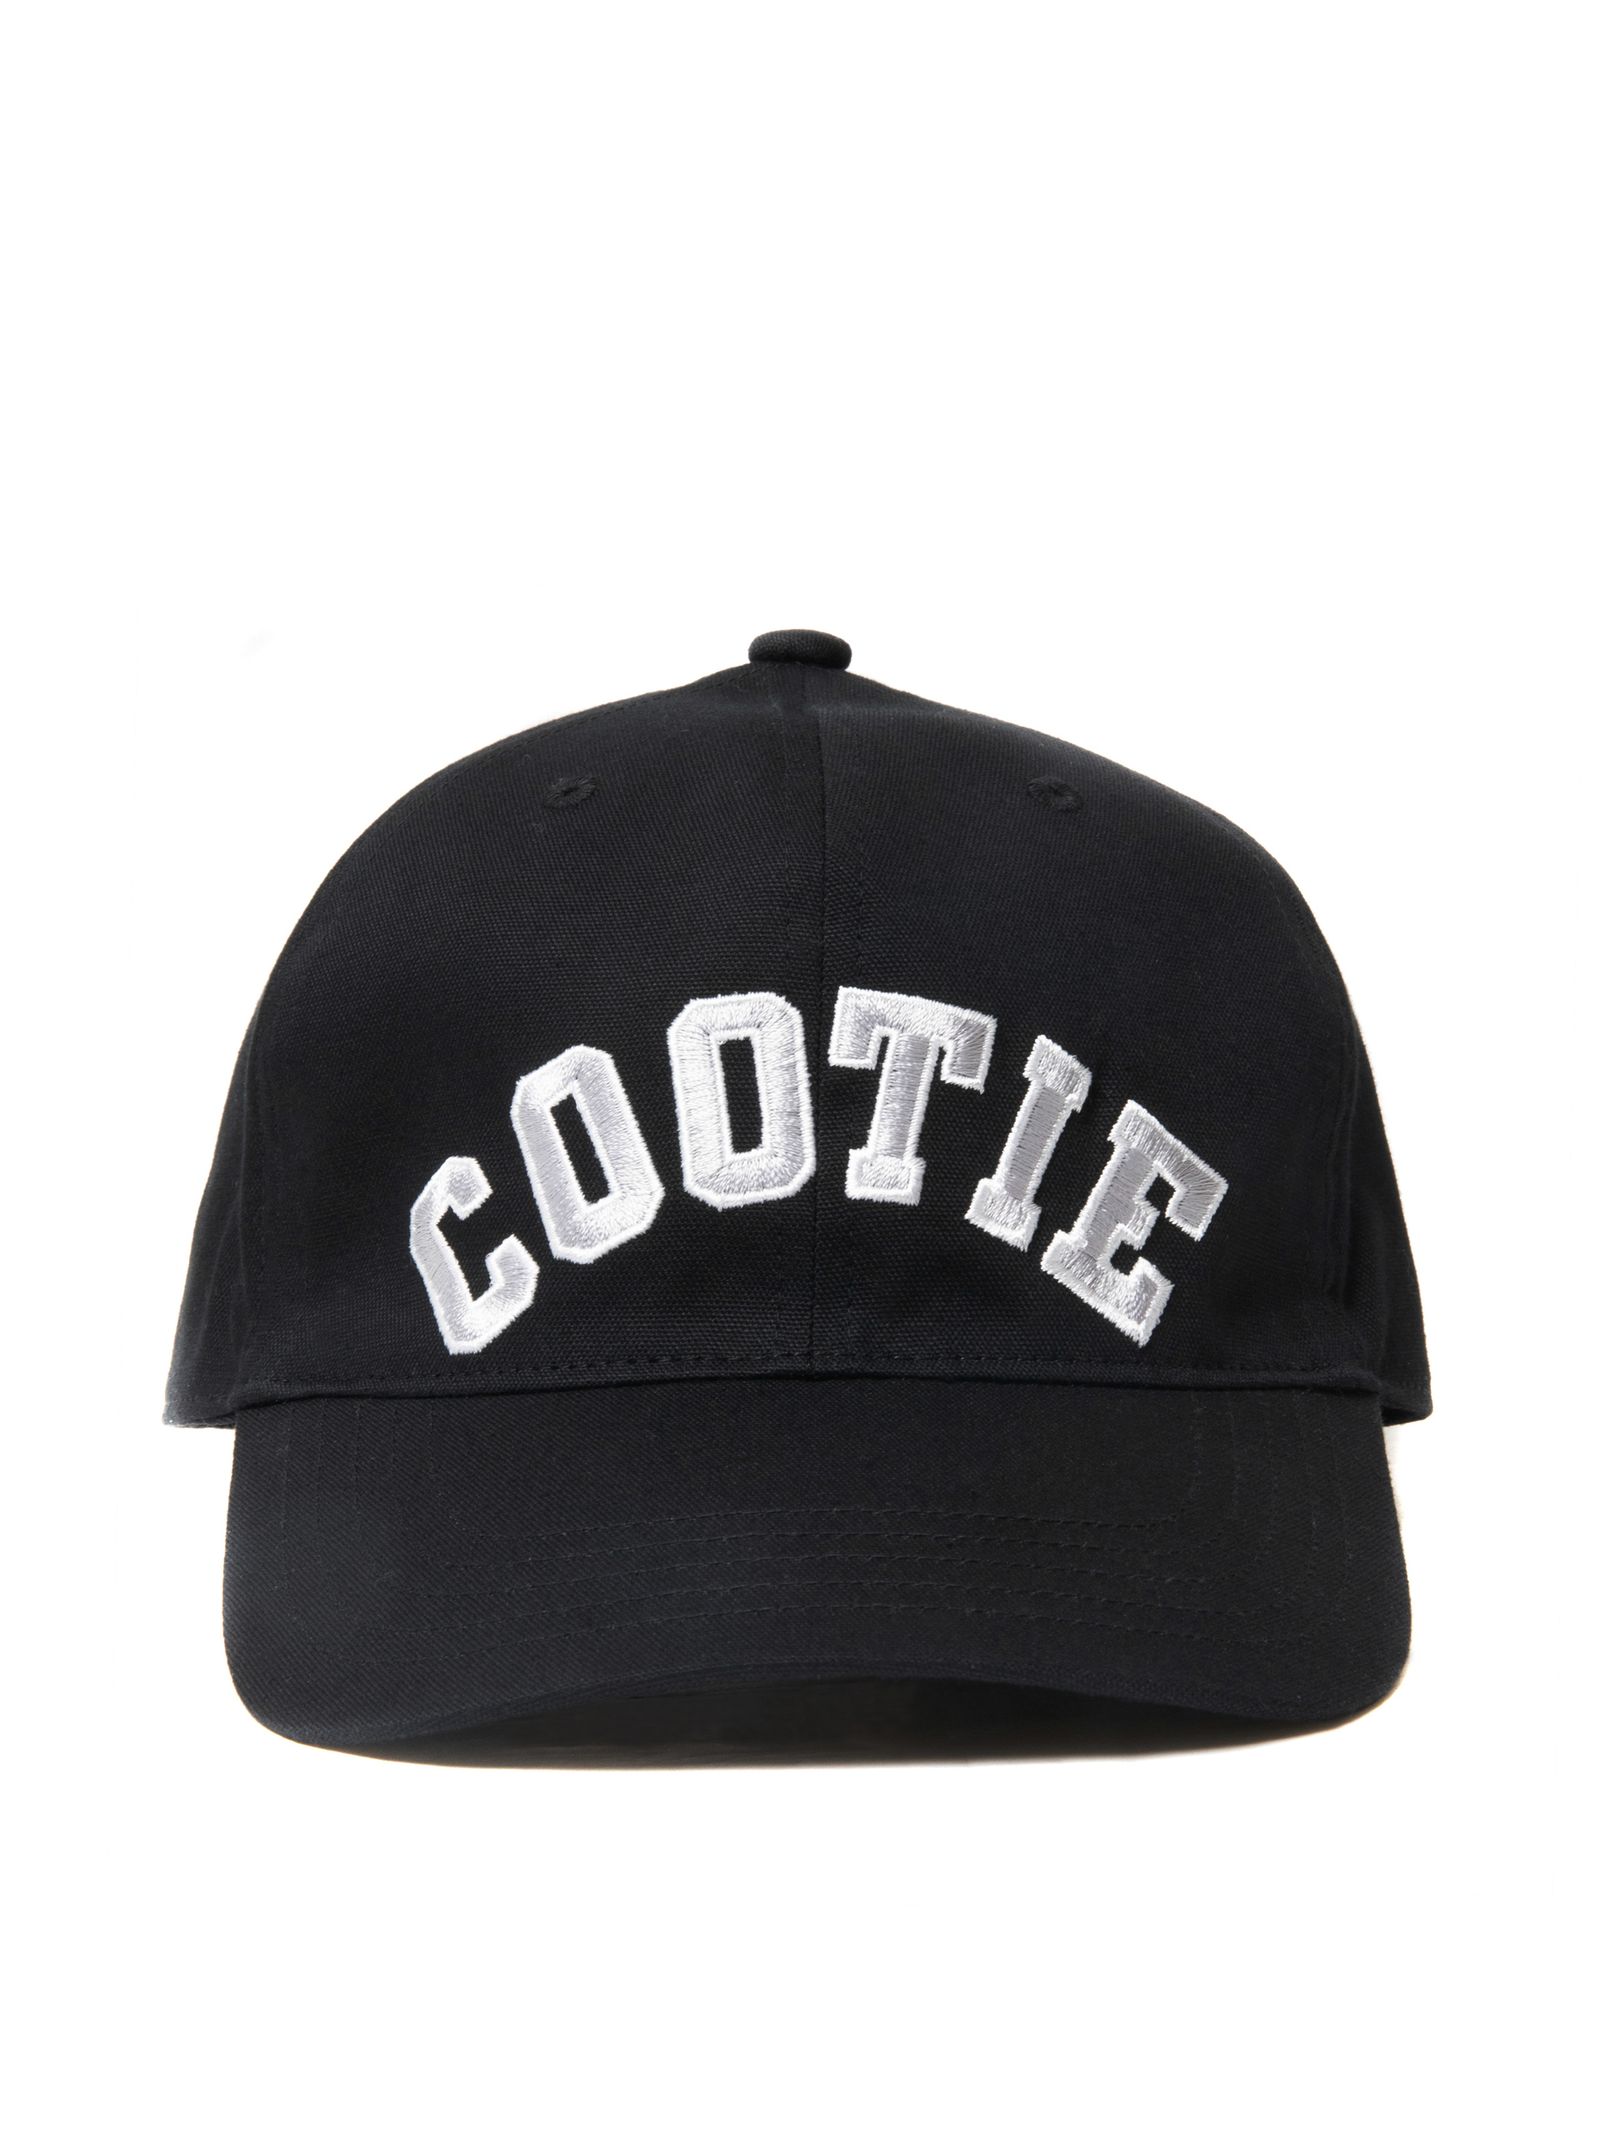 COOTIE PRODUCTIONS/Polyest cap 2023 初売り